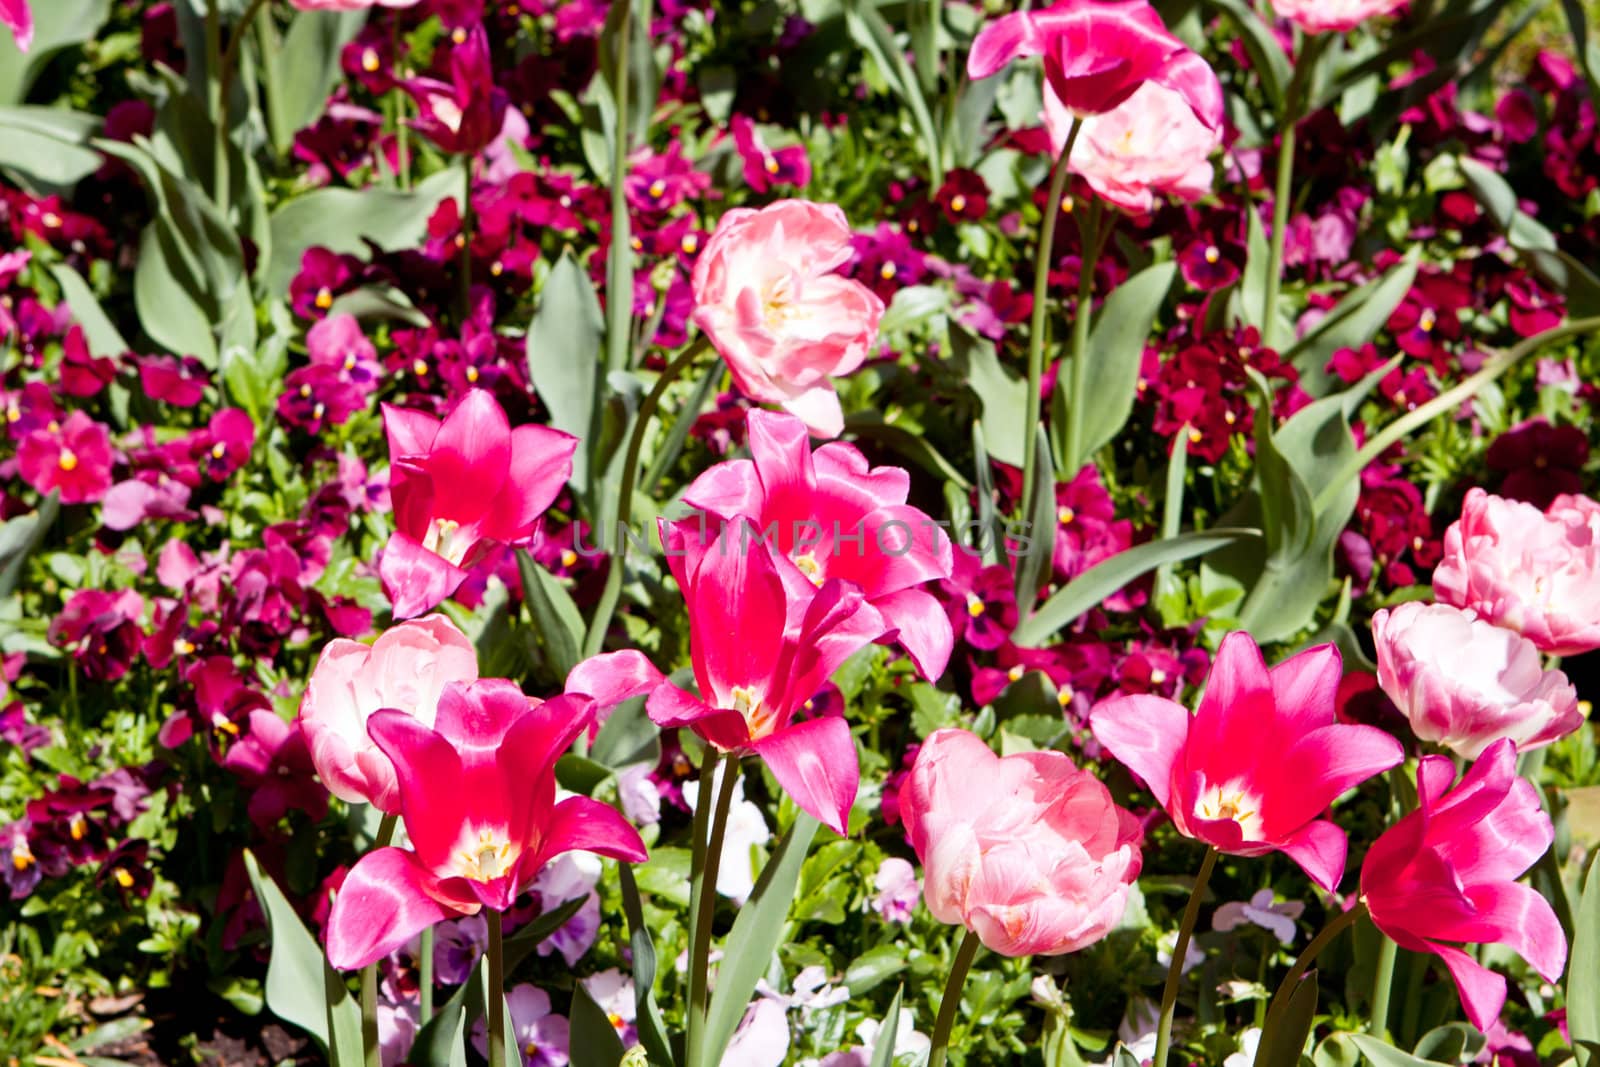 beautiful colorful pink tulips outdoor in spring